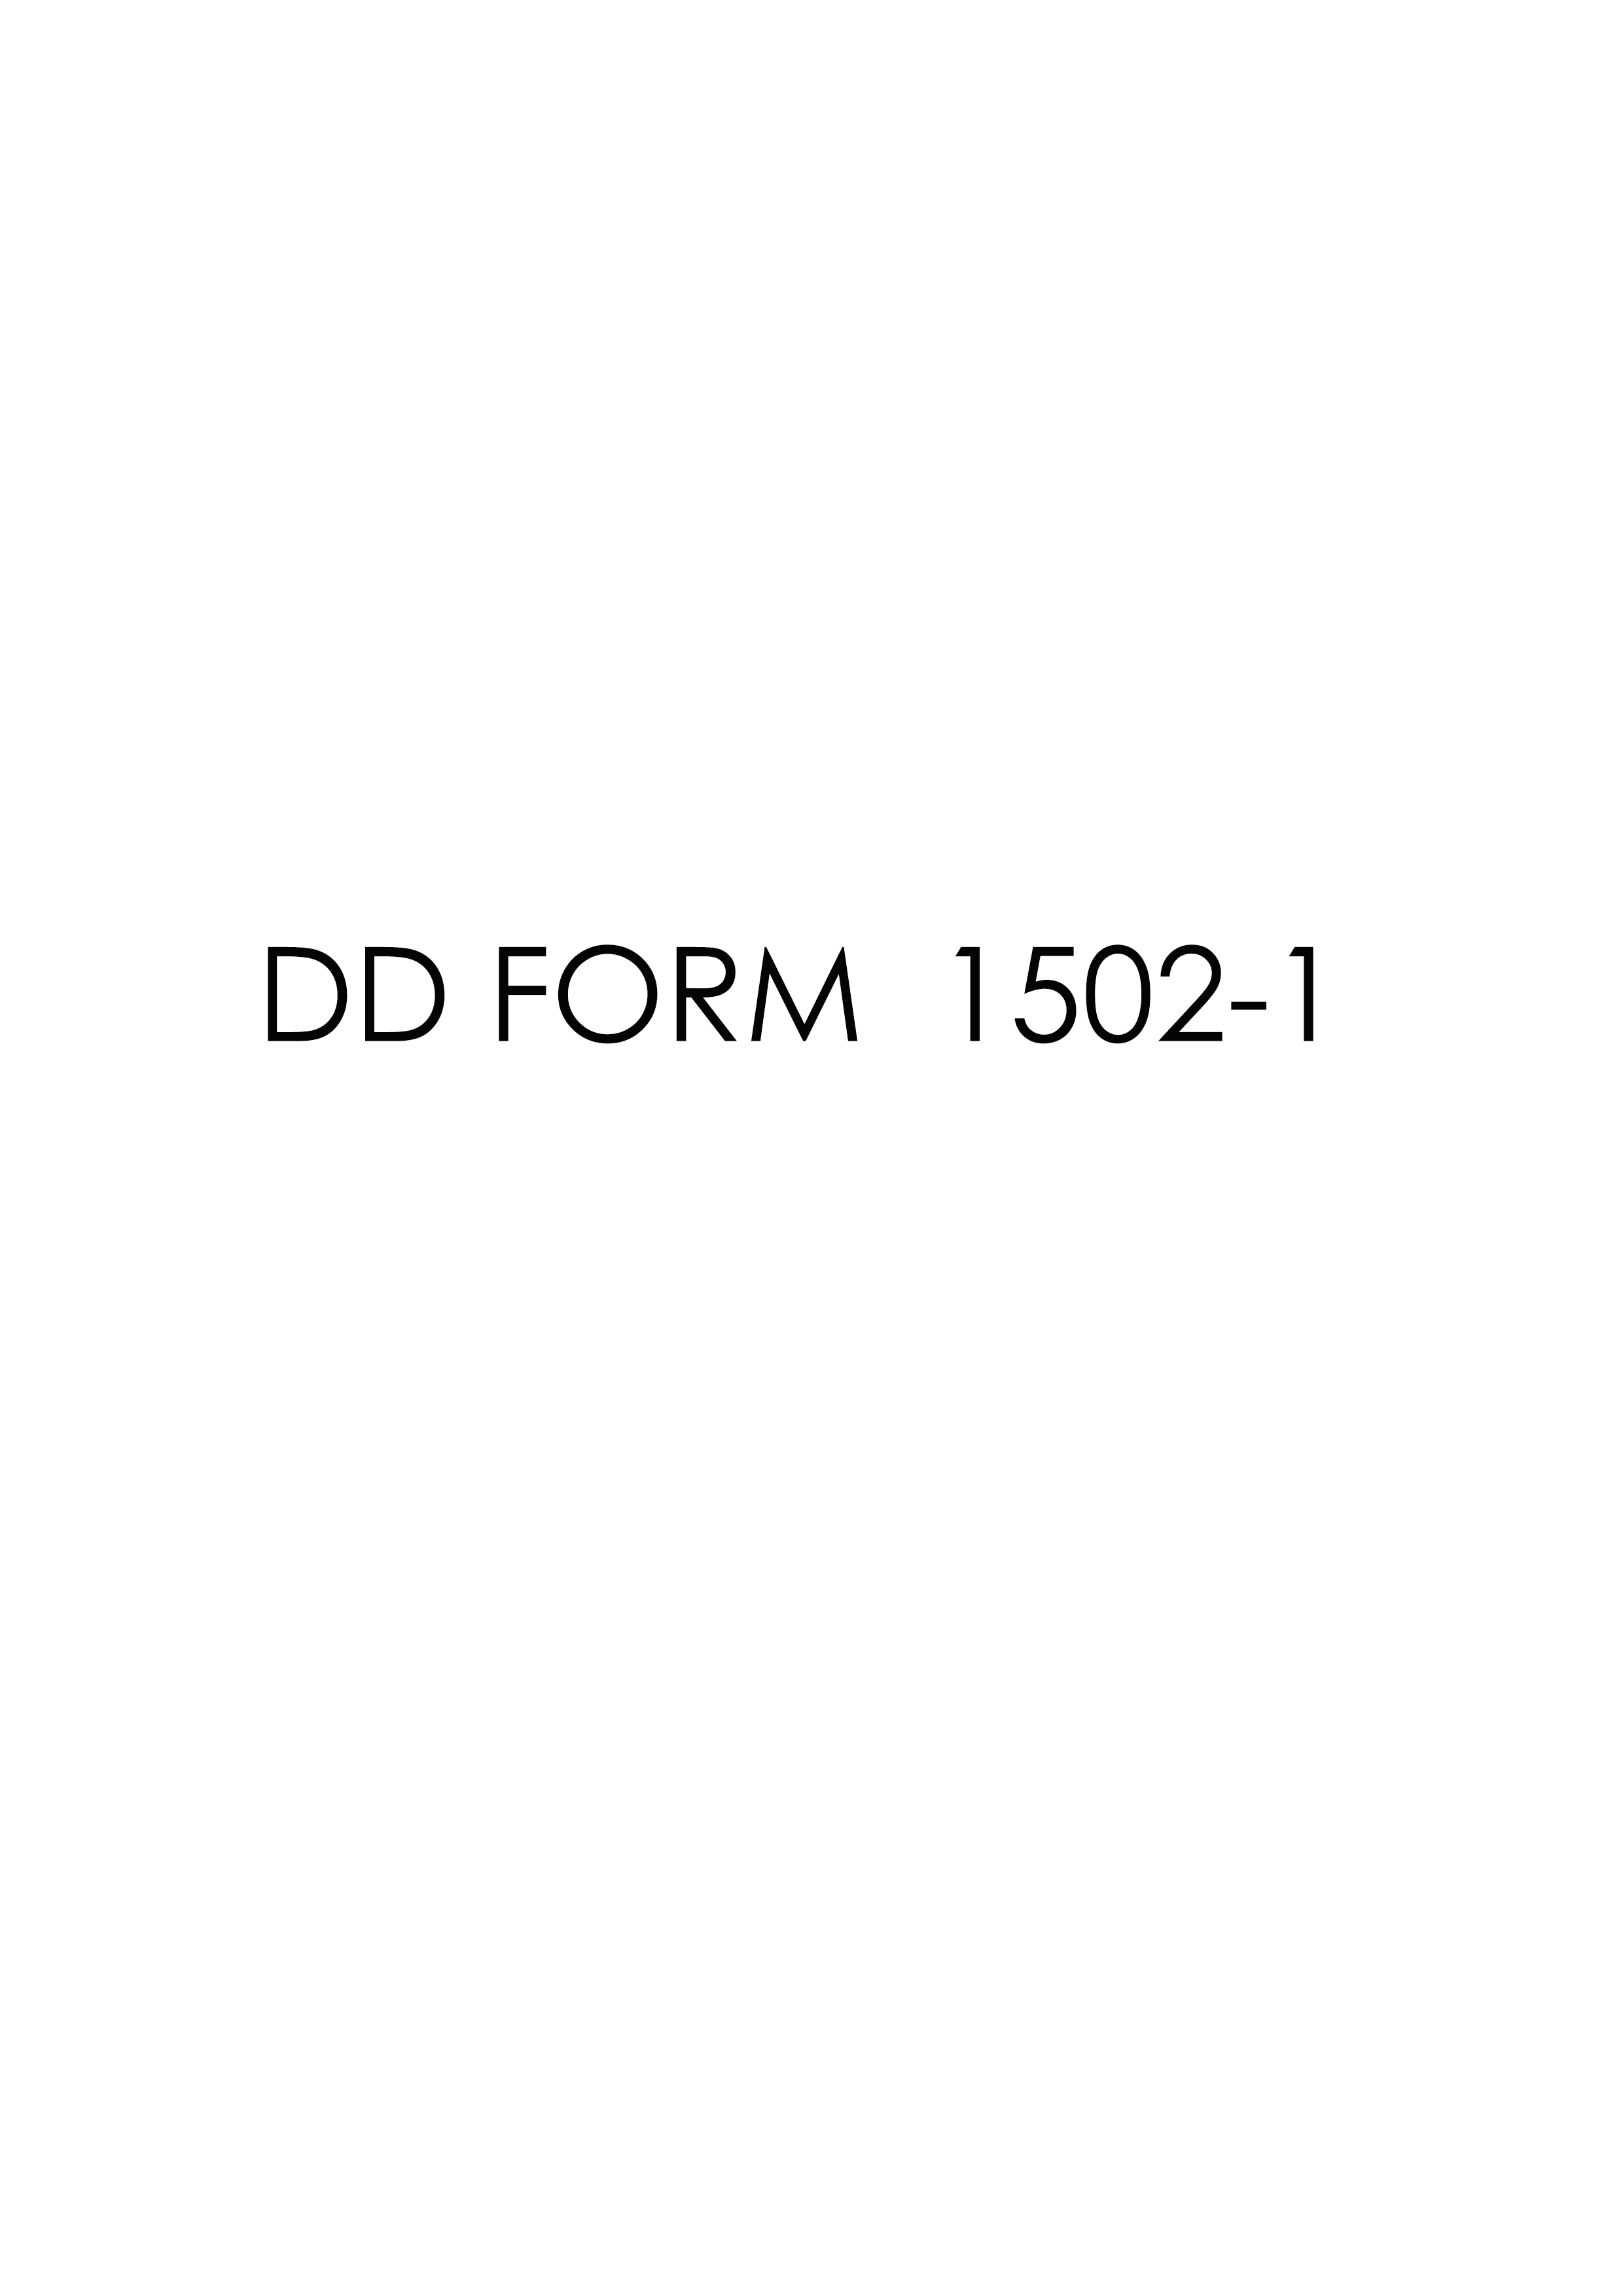 Download Fillable dd Form 1502-1